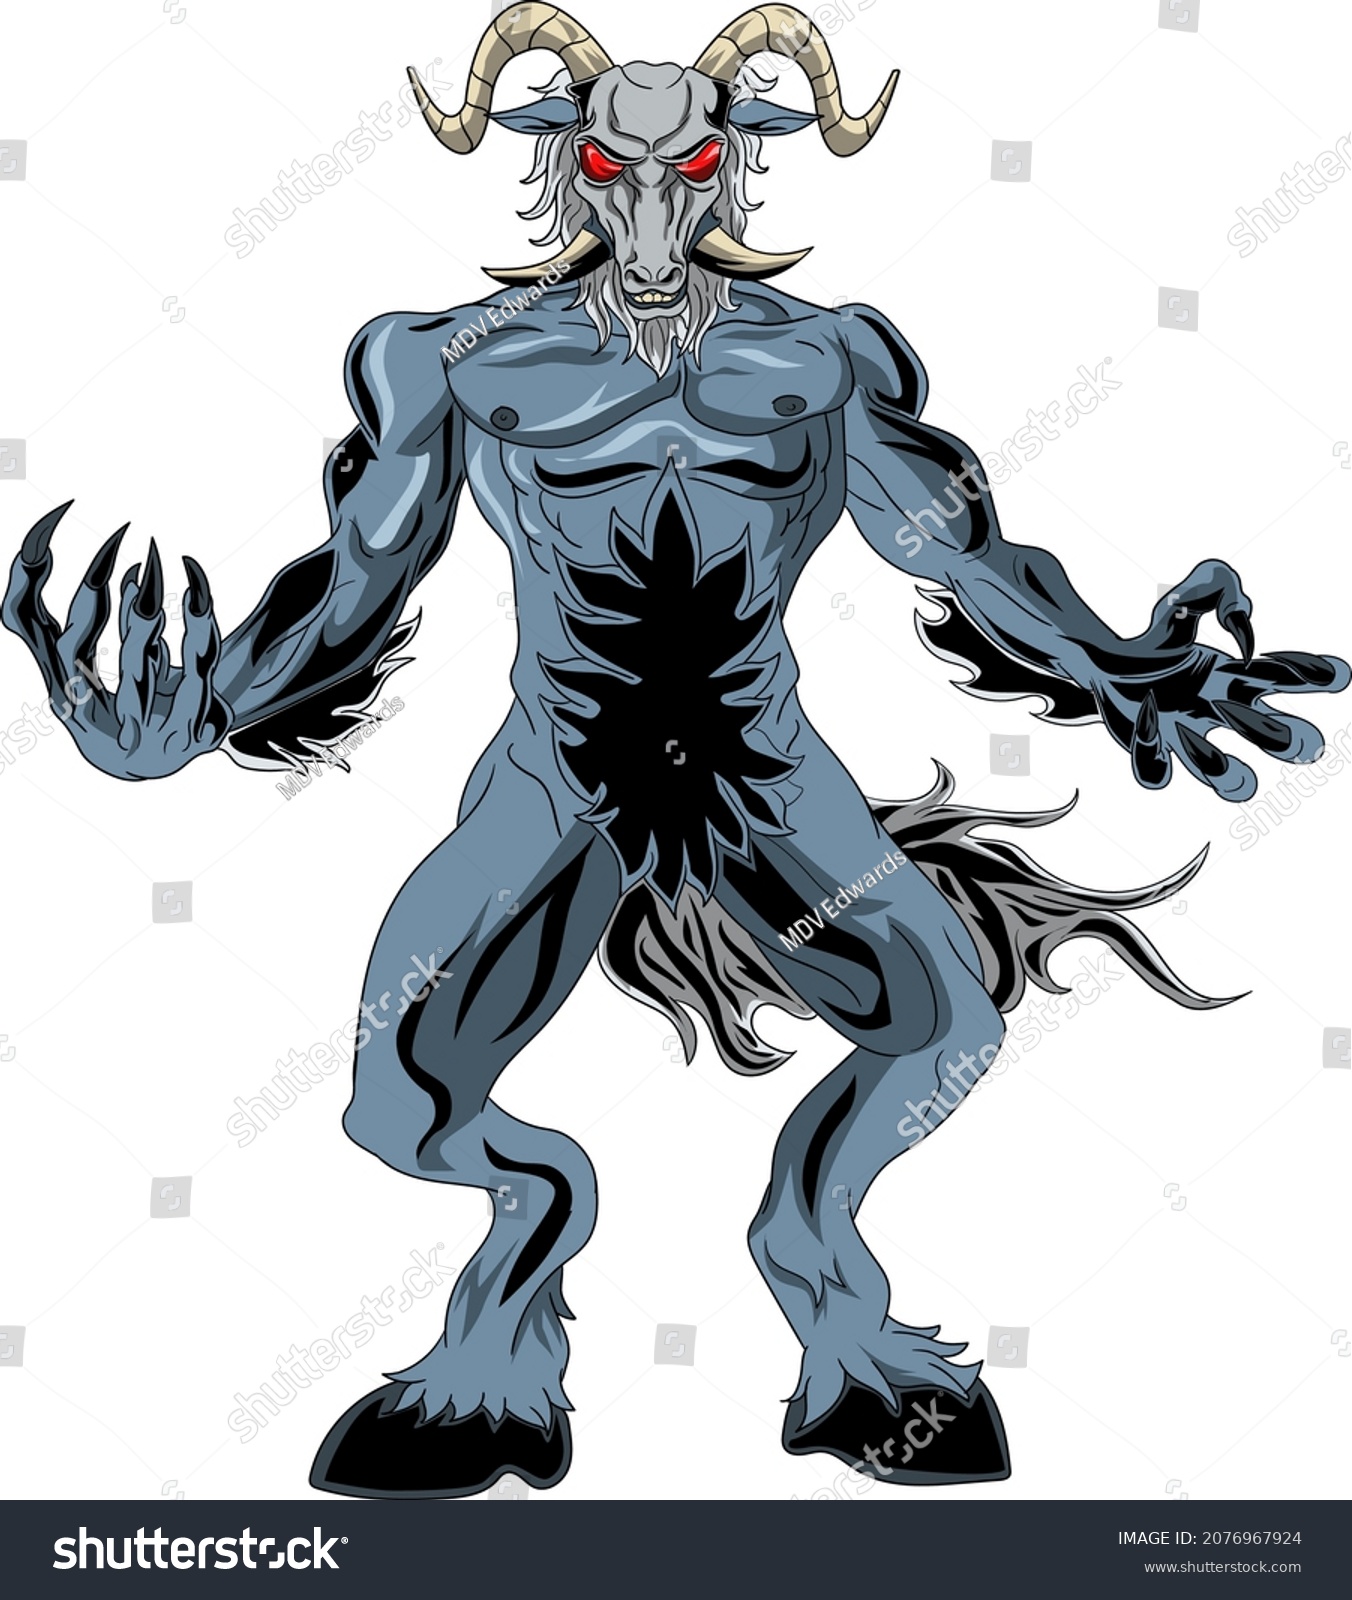 SVG of A large demonic satyr with a head of a monstrous goat with tusk like incisors. Half man, half animal mythological creature. svg